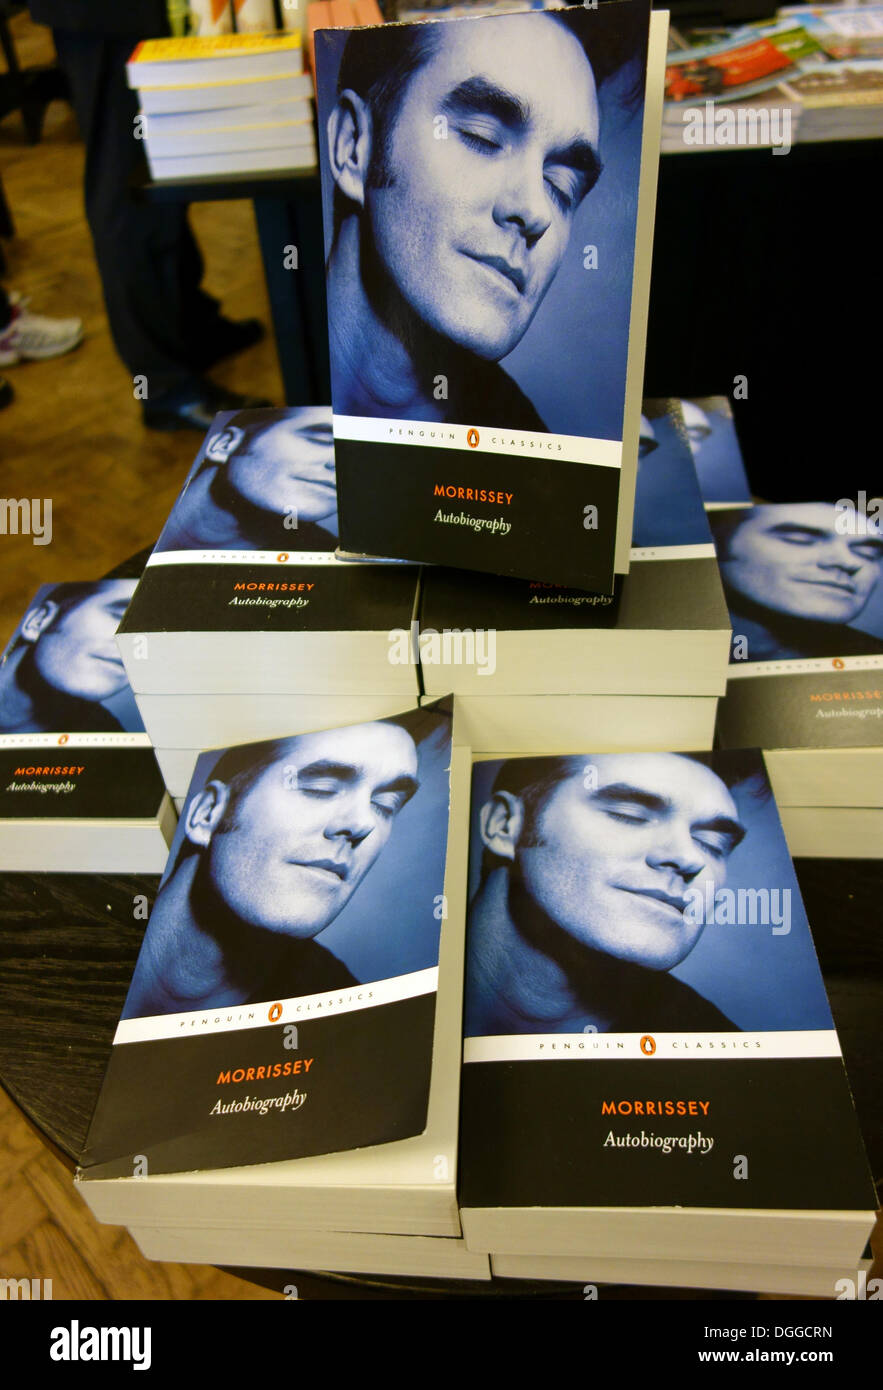 Penguin Classics: why are they publishing Morrissey's